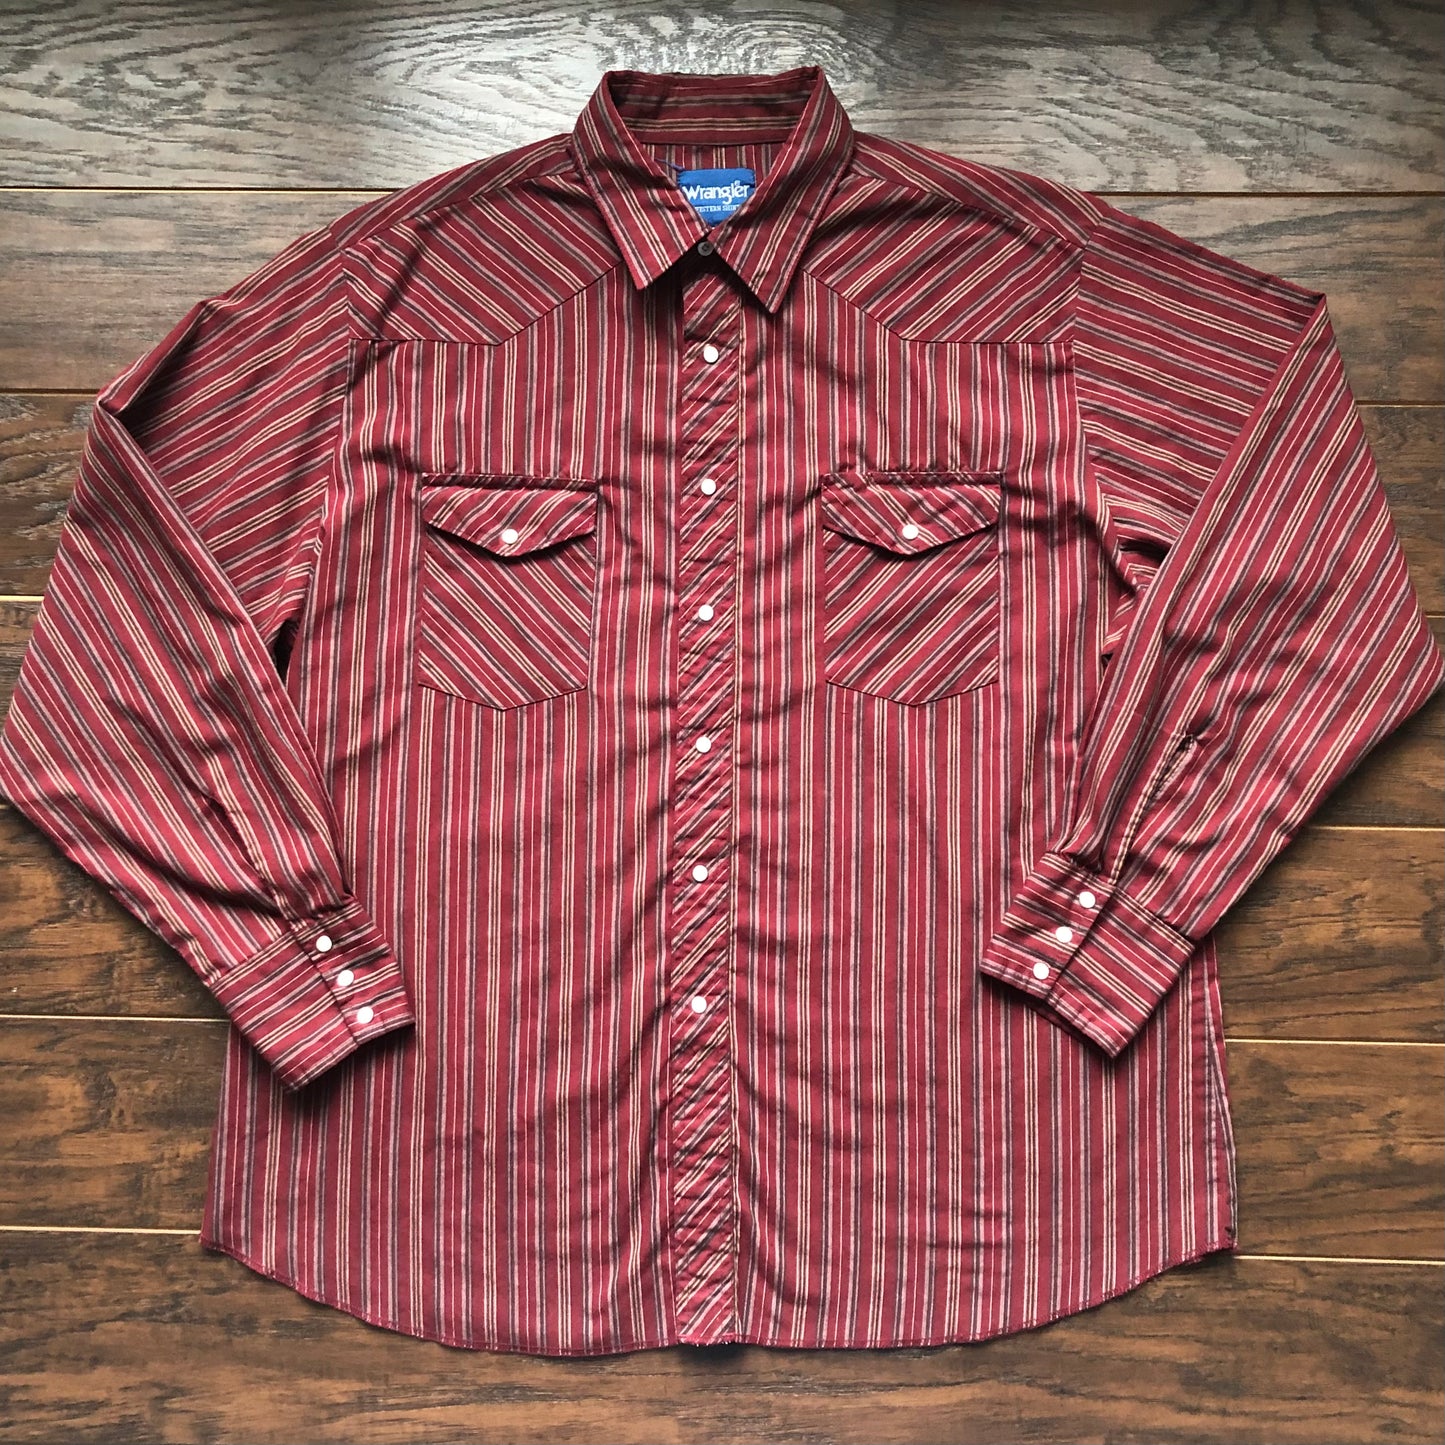 Vintage Western Men’s Striped Wrangler Shirt with Snap Buttons